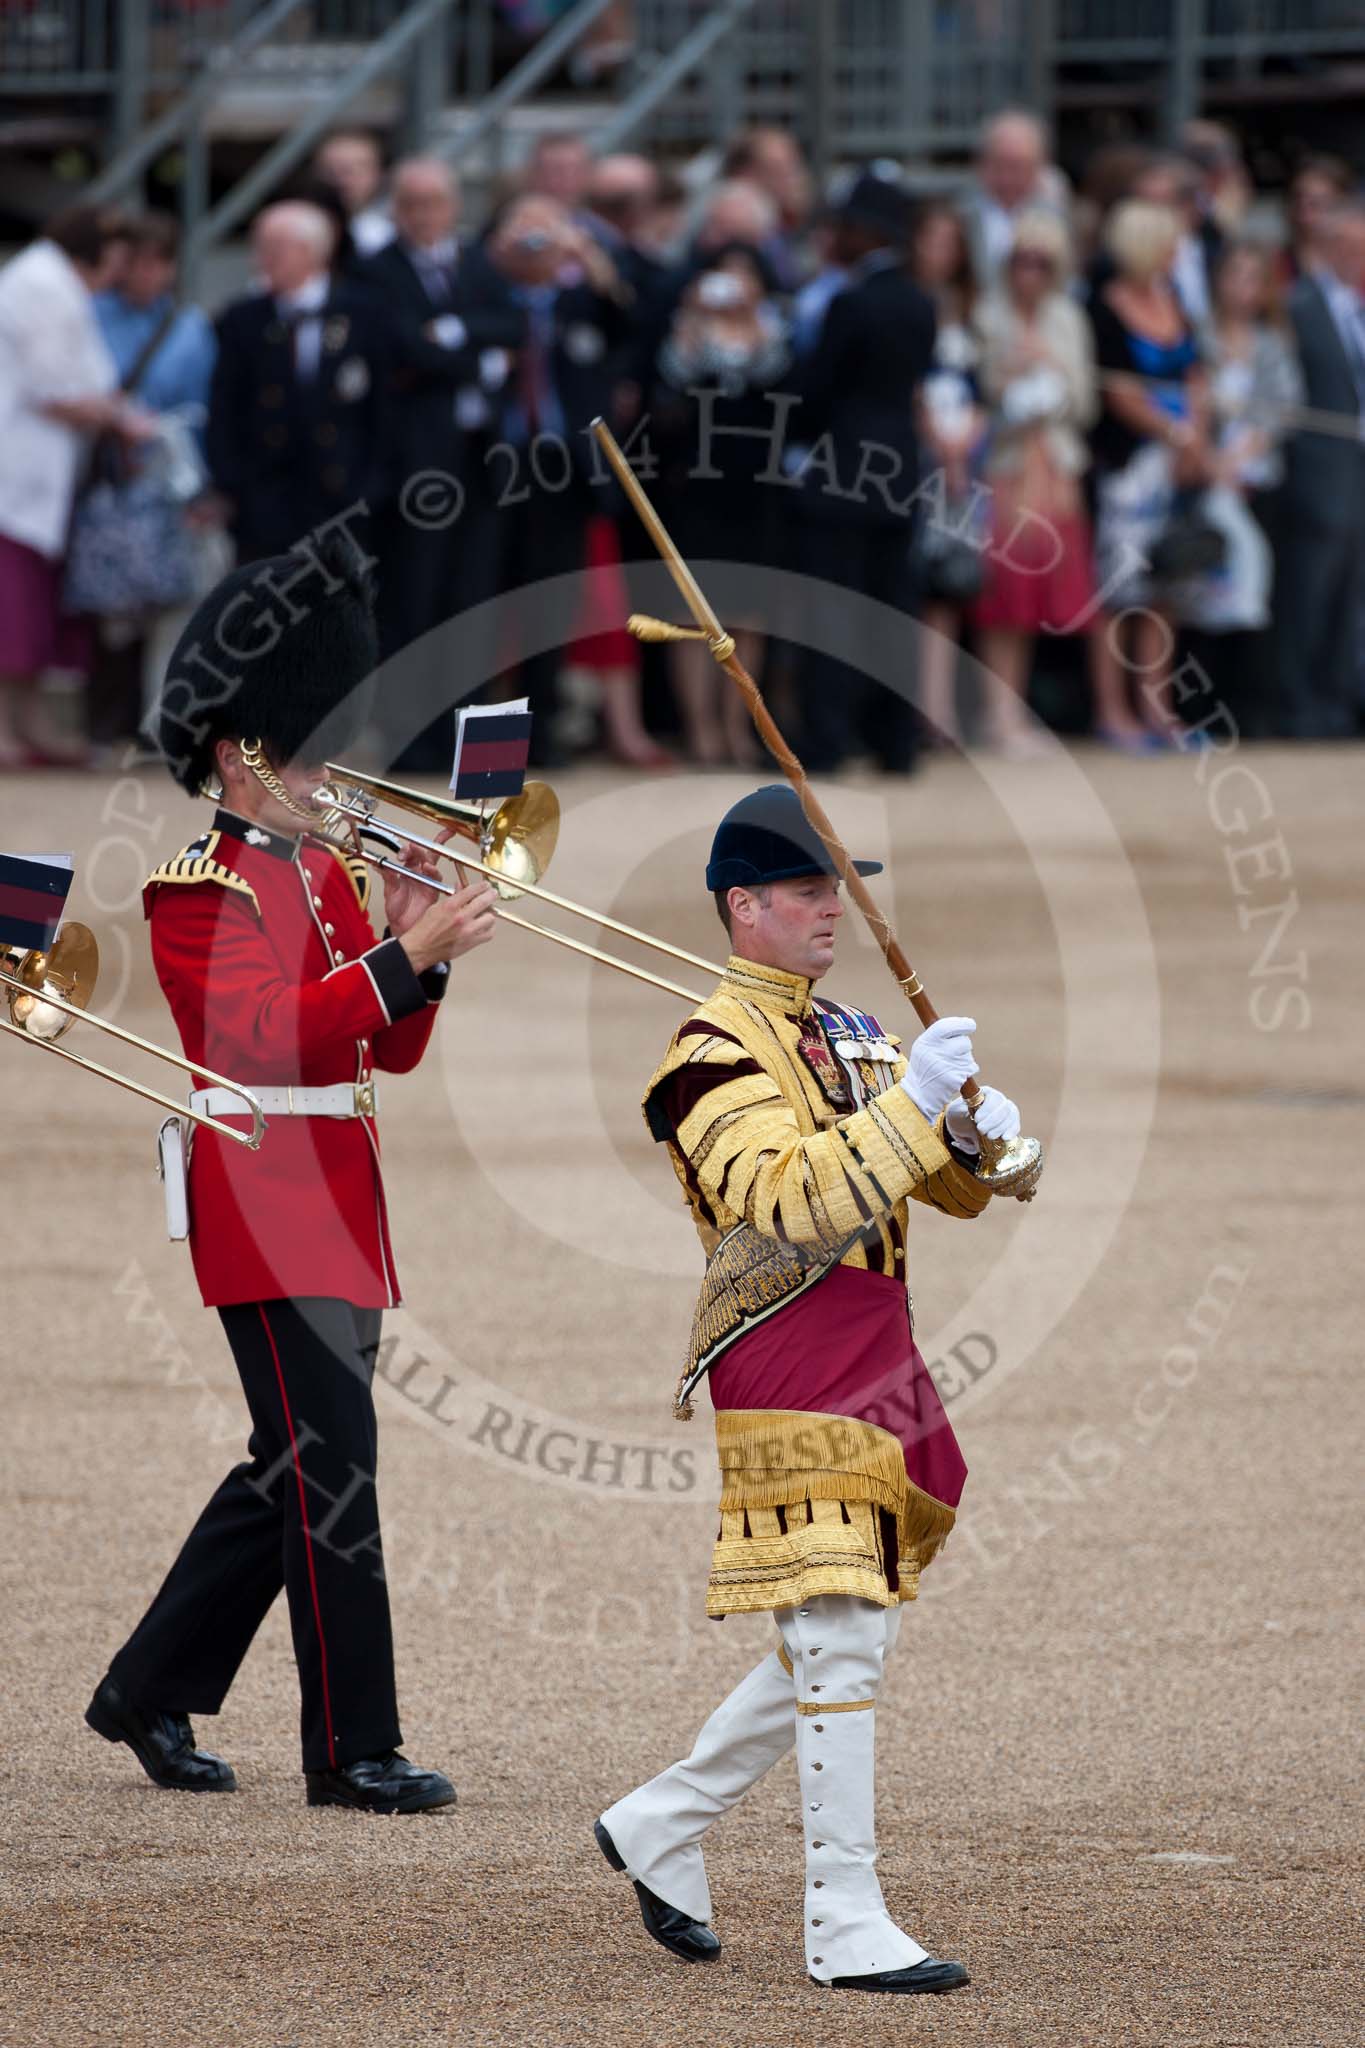 Trooping the Colour 2009: Senior Drum Major Tony Moors, Grenadier Guards, leading the Band of the Grenadier Guards..
Horse Guards Parade, Westminster,
London SW1,

United Kingdom,
on 13 June 2009 at 10:13, image #27